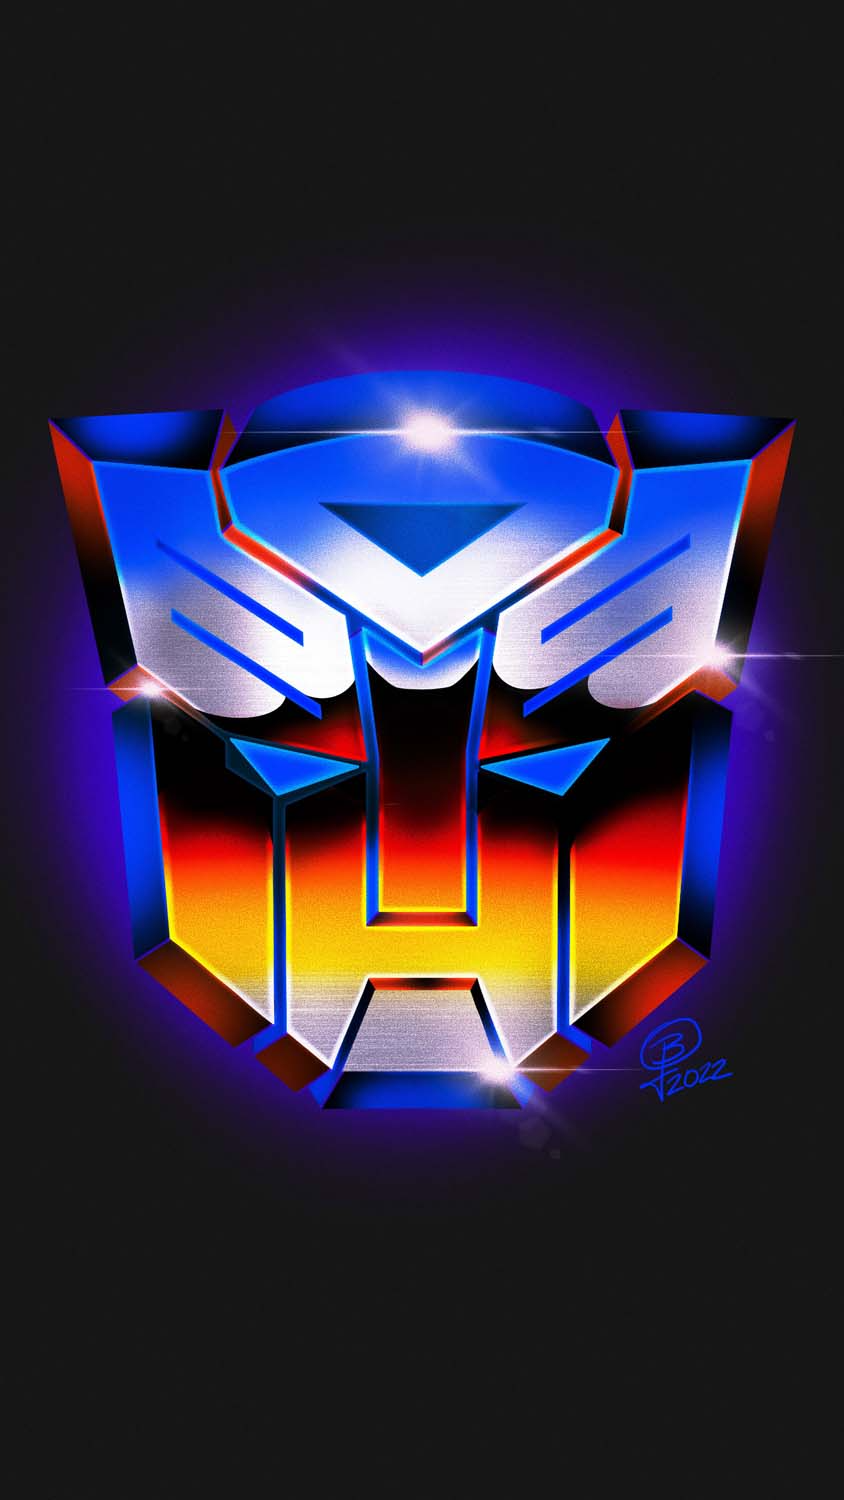 Autobots Transformers Logo IPhone Wallpaper HD  IPhone Wallpapers